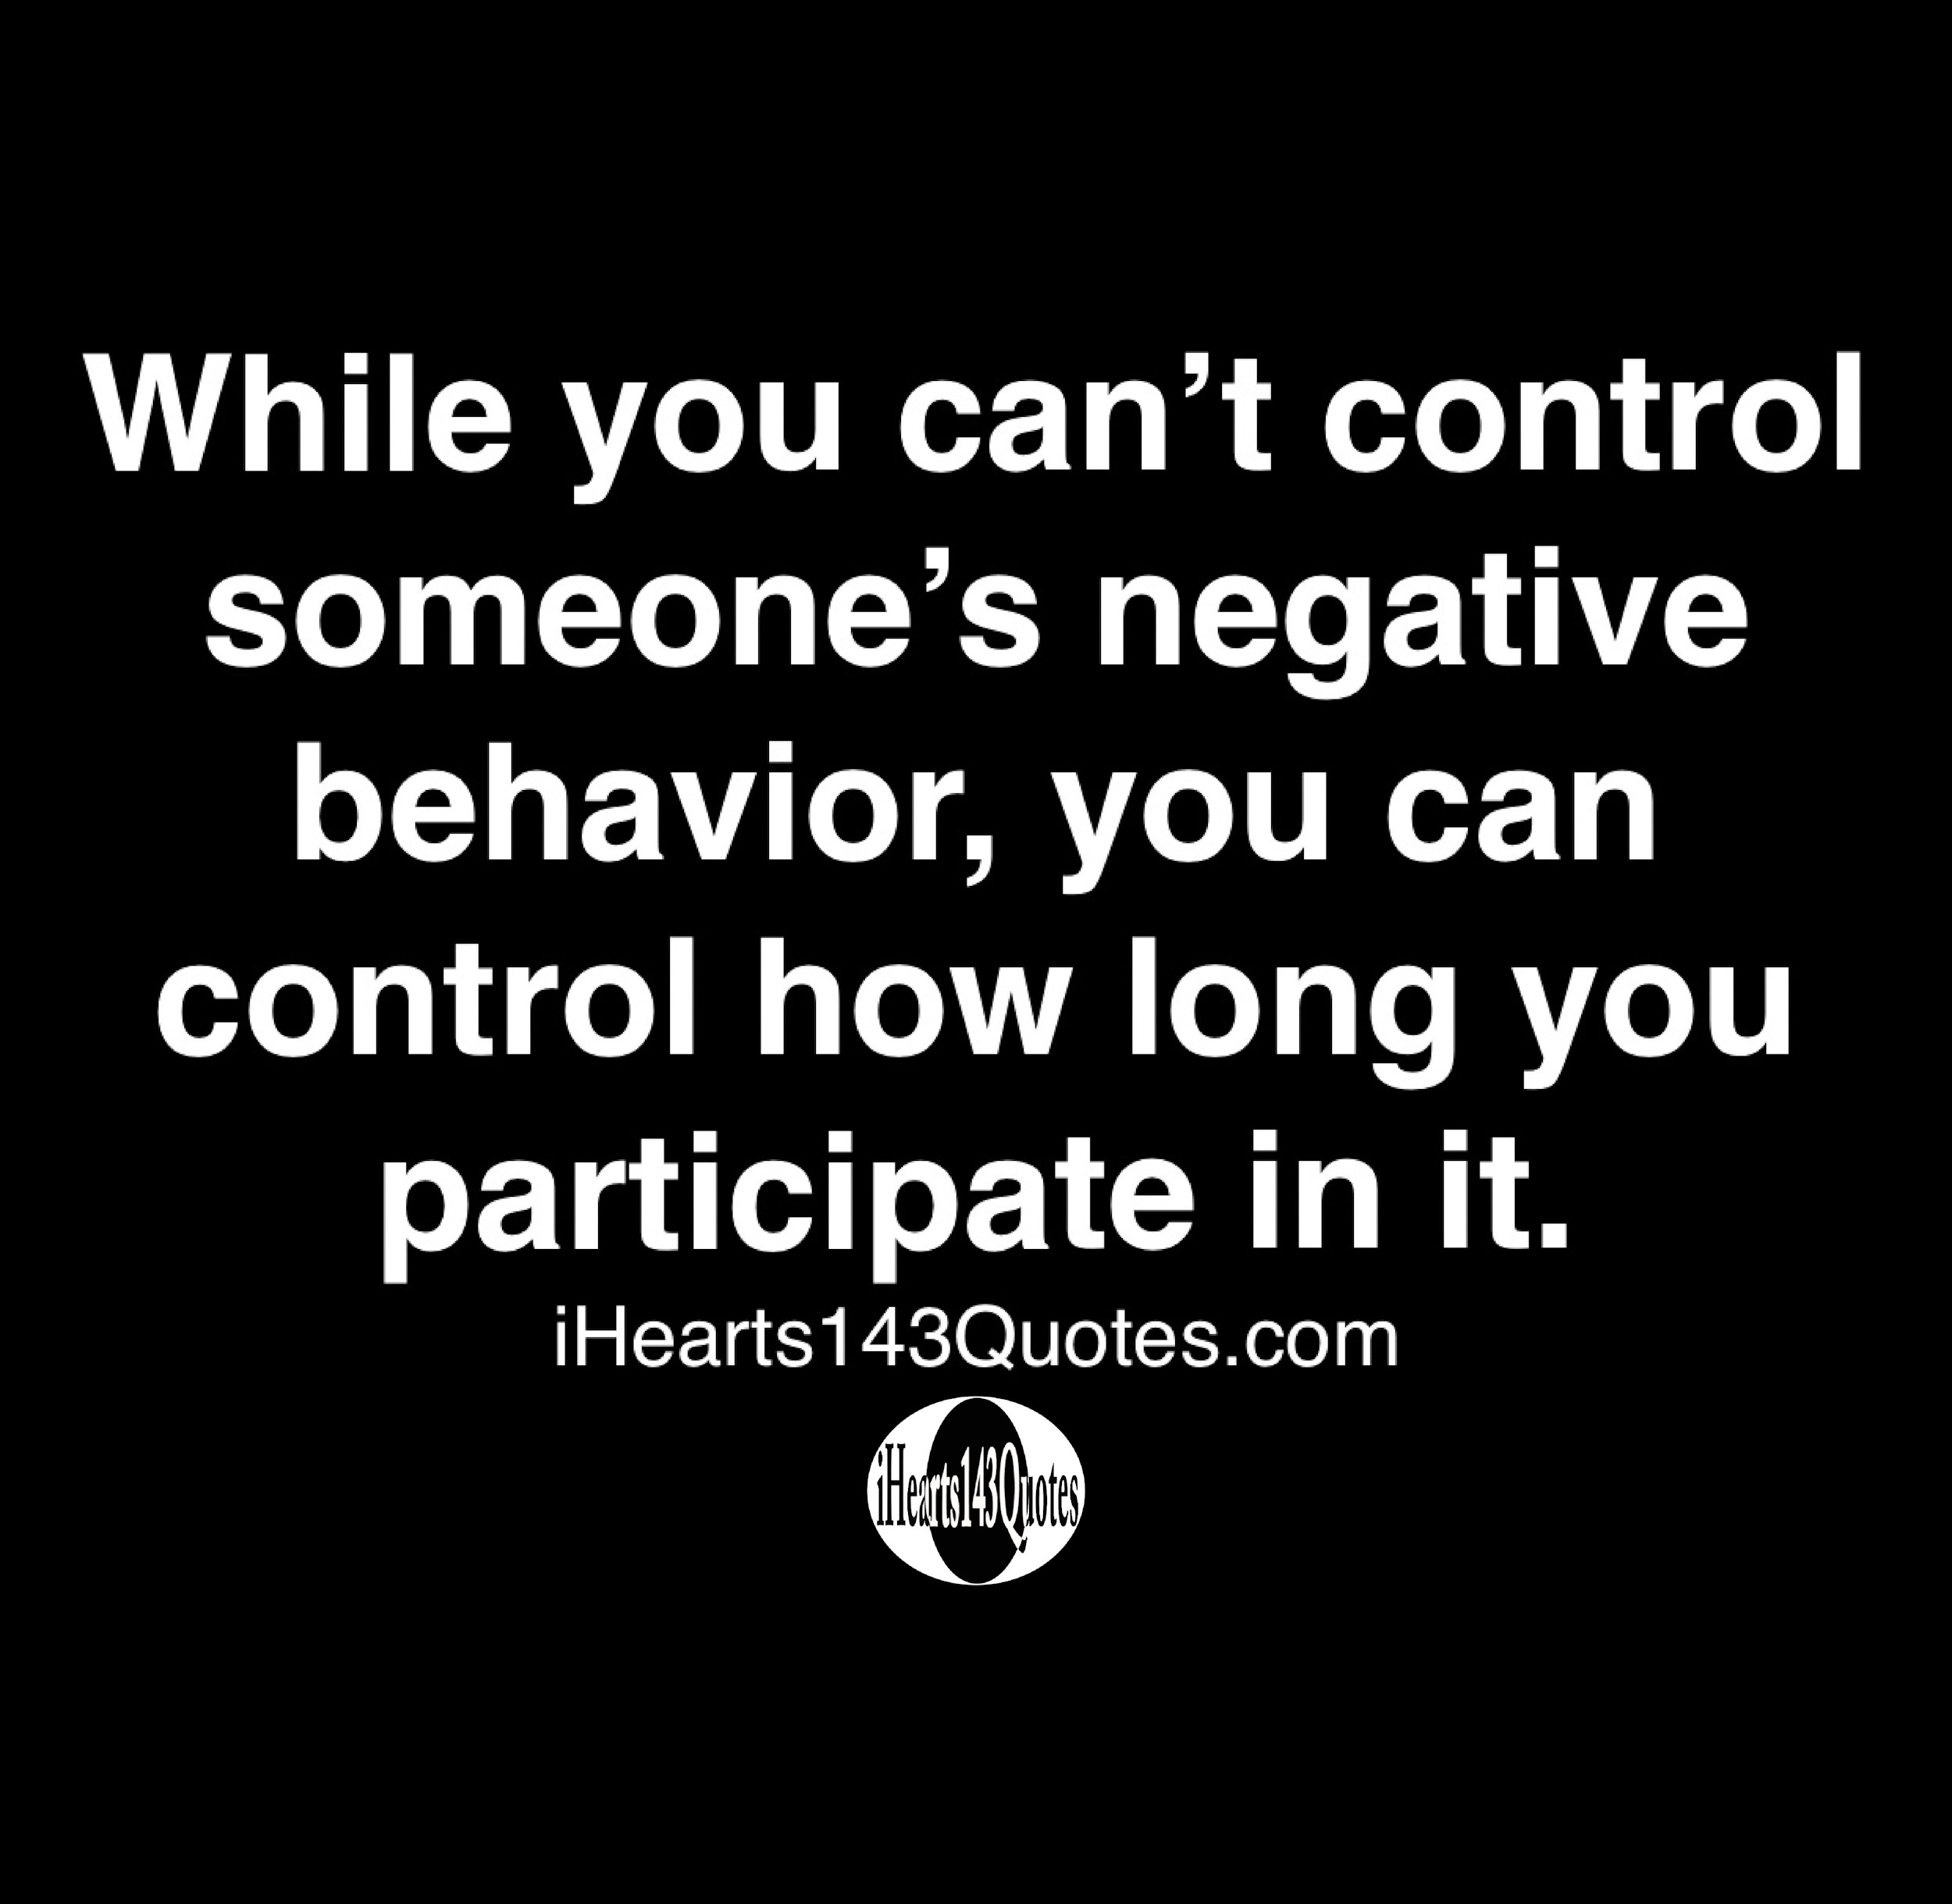 While you can't control someone's negative behavior, you can control ...